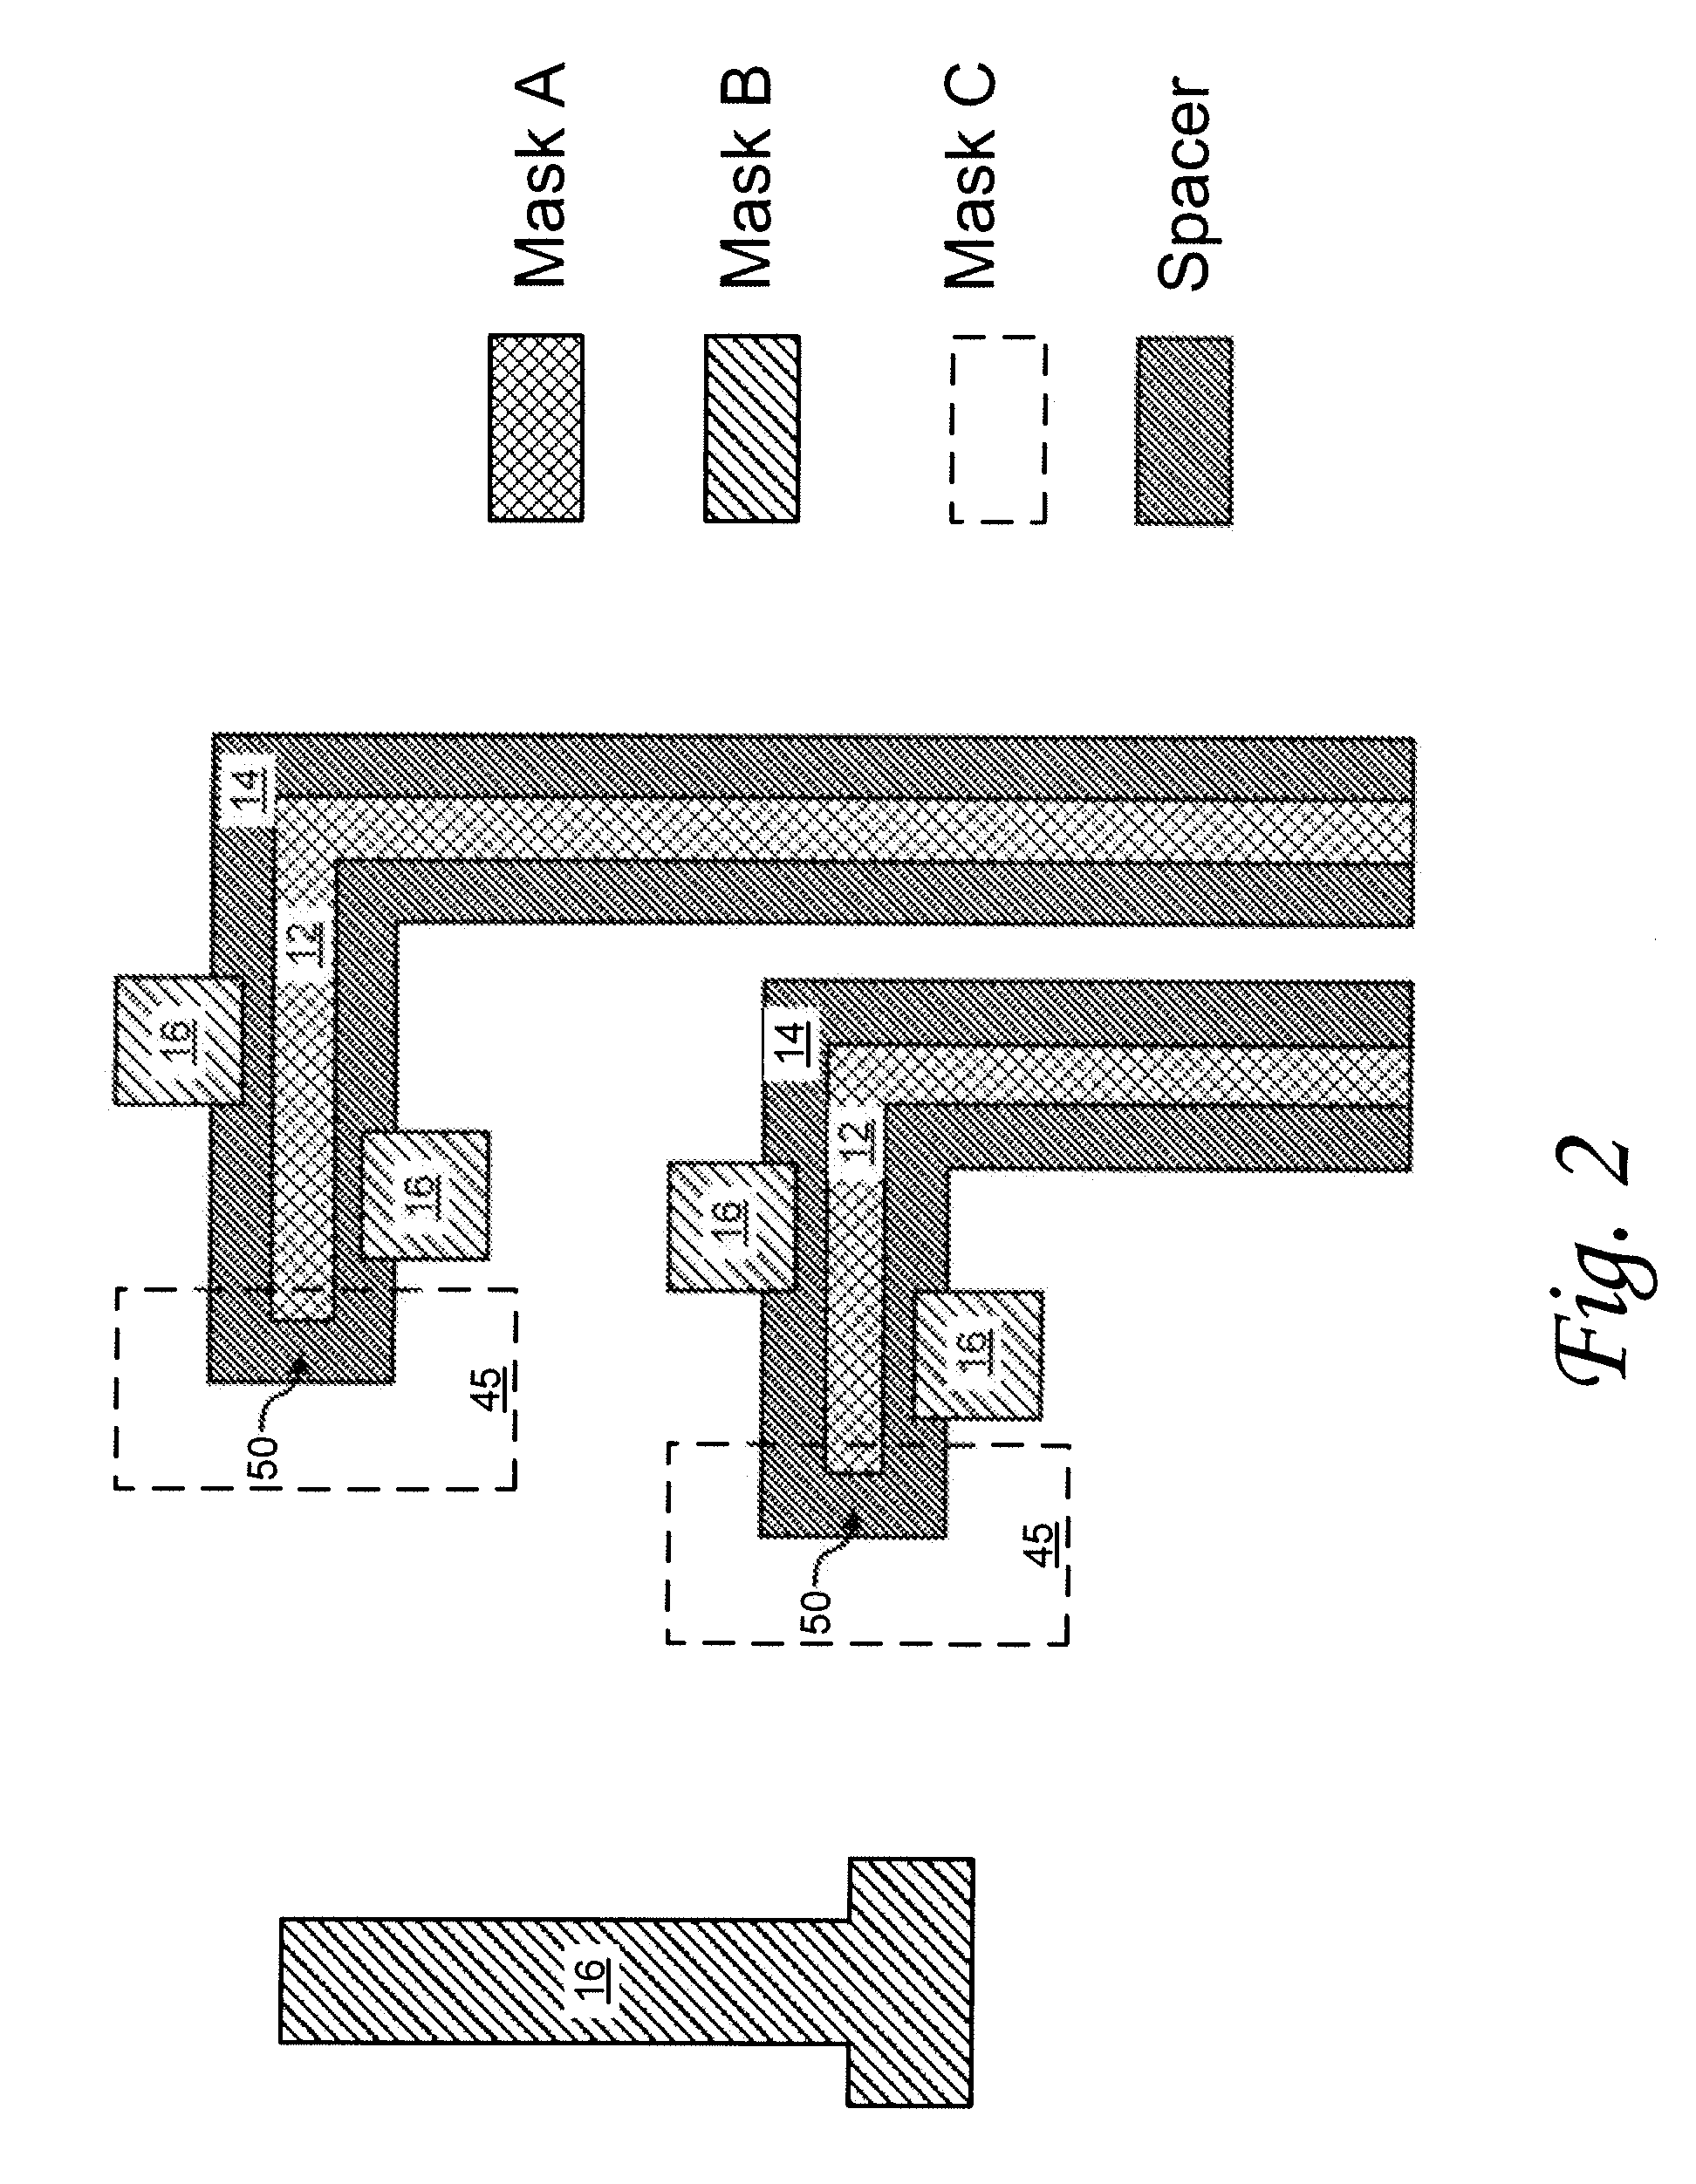 Method of eliminating a lithography operation